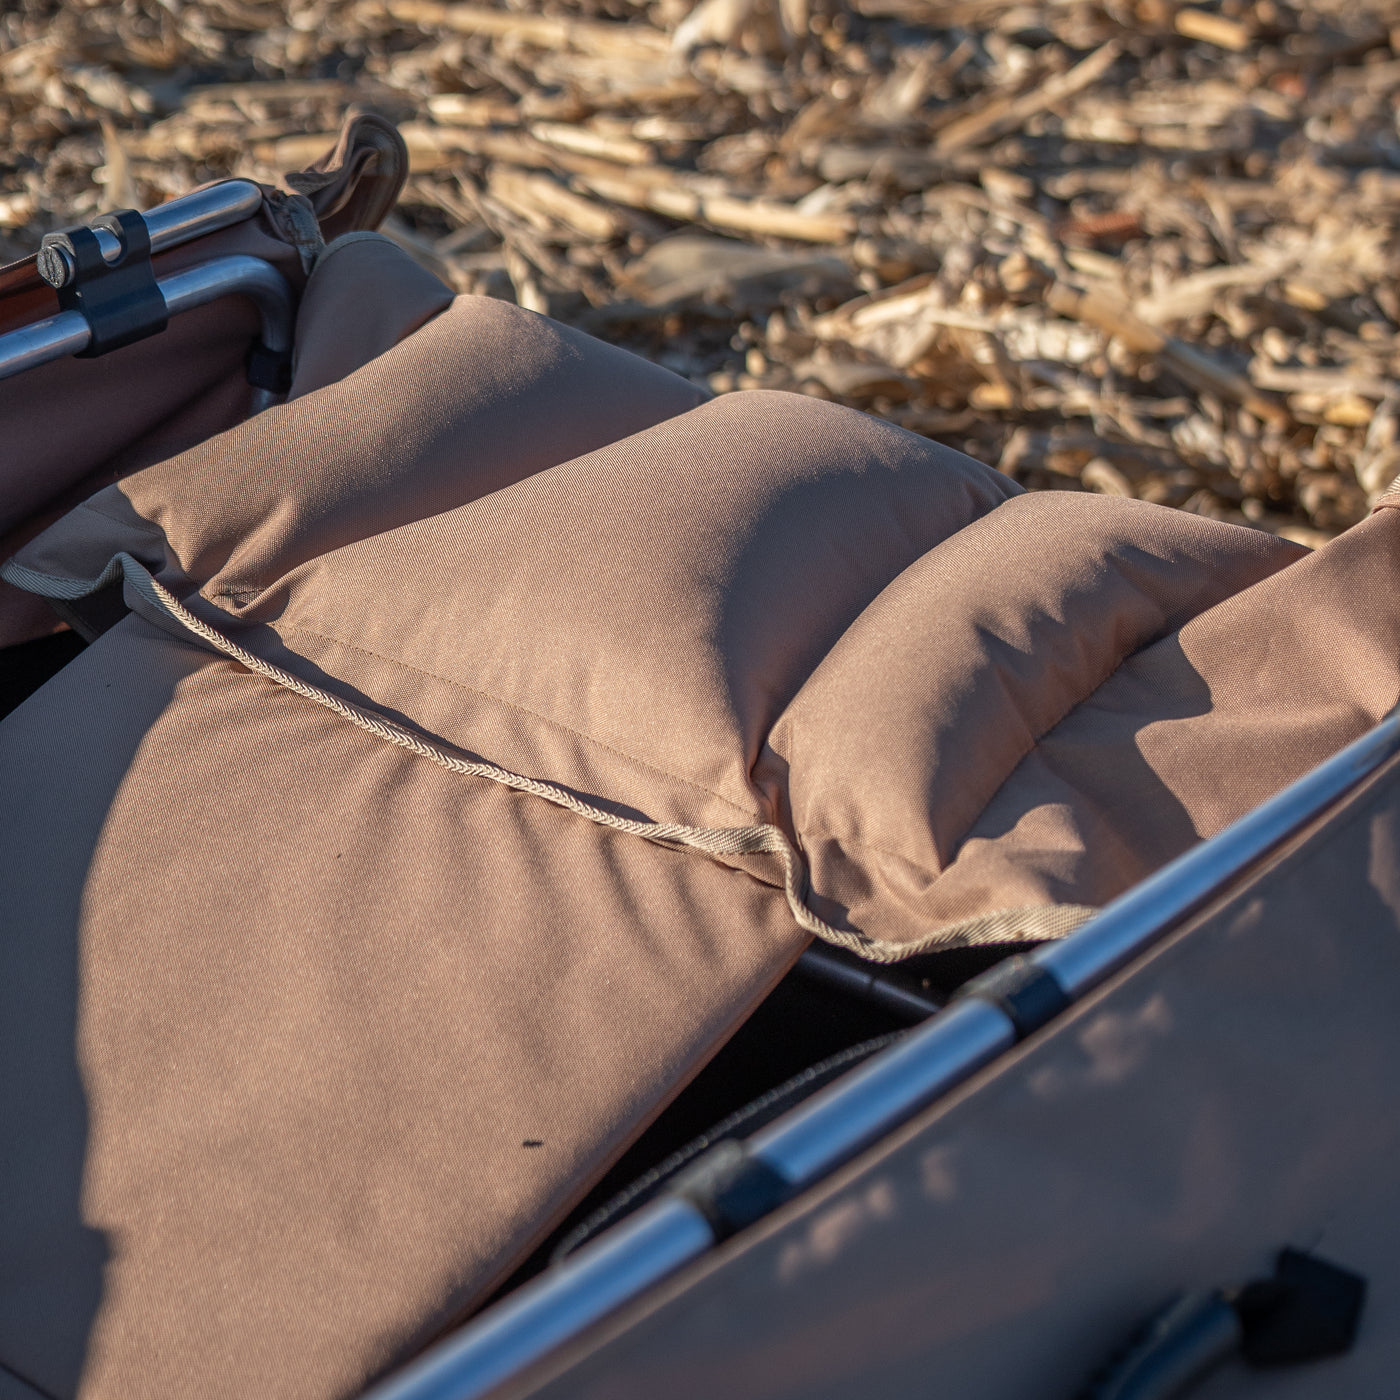 lowPRO Layout Blind *COMING THIS FALL!